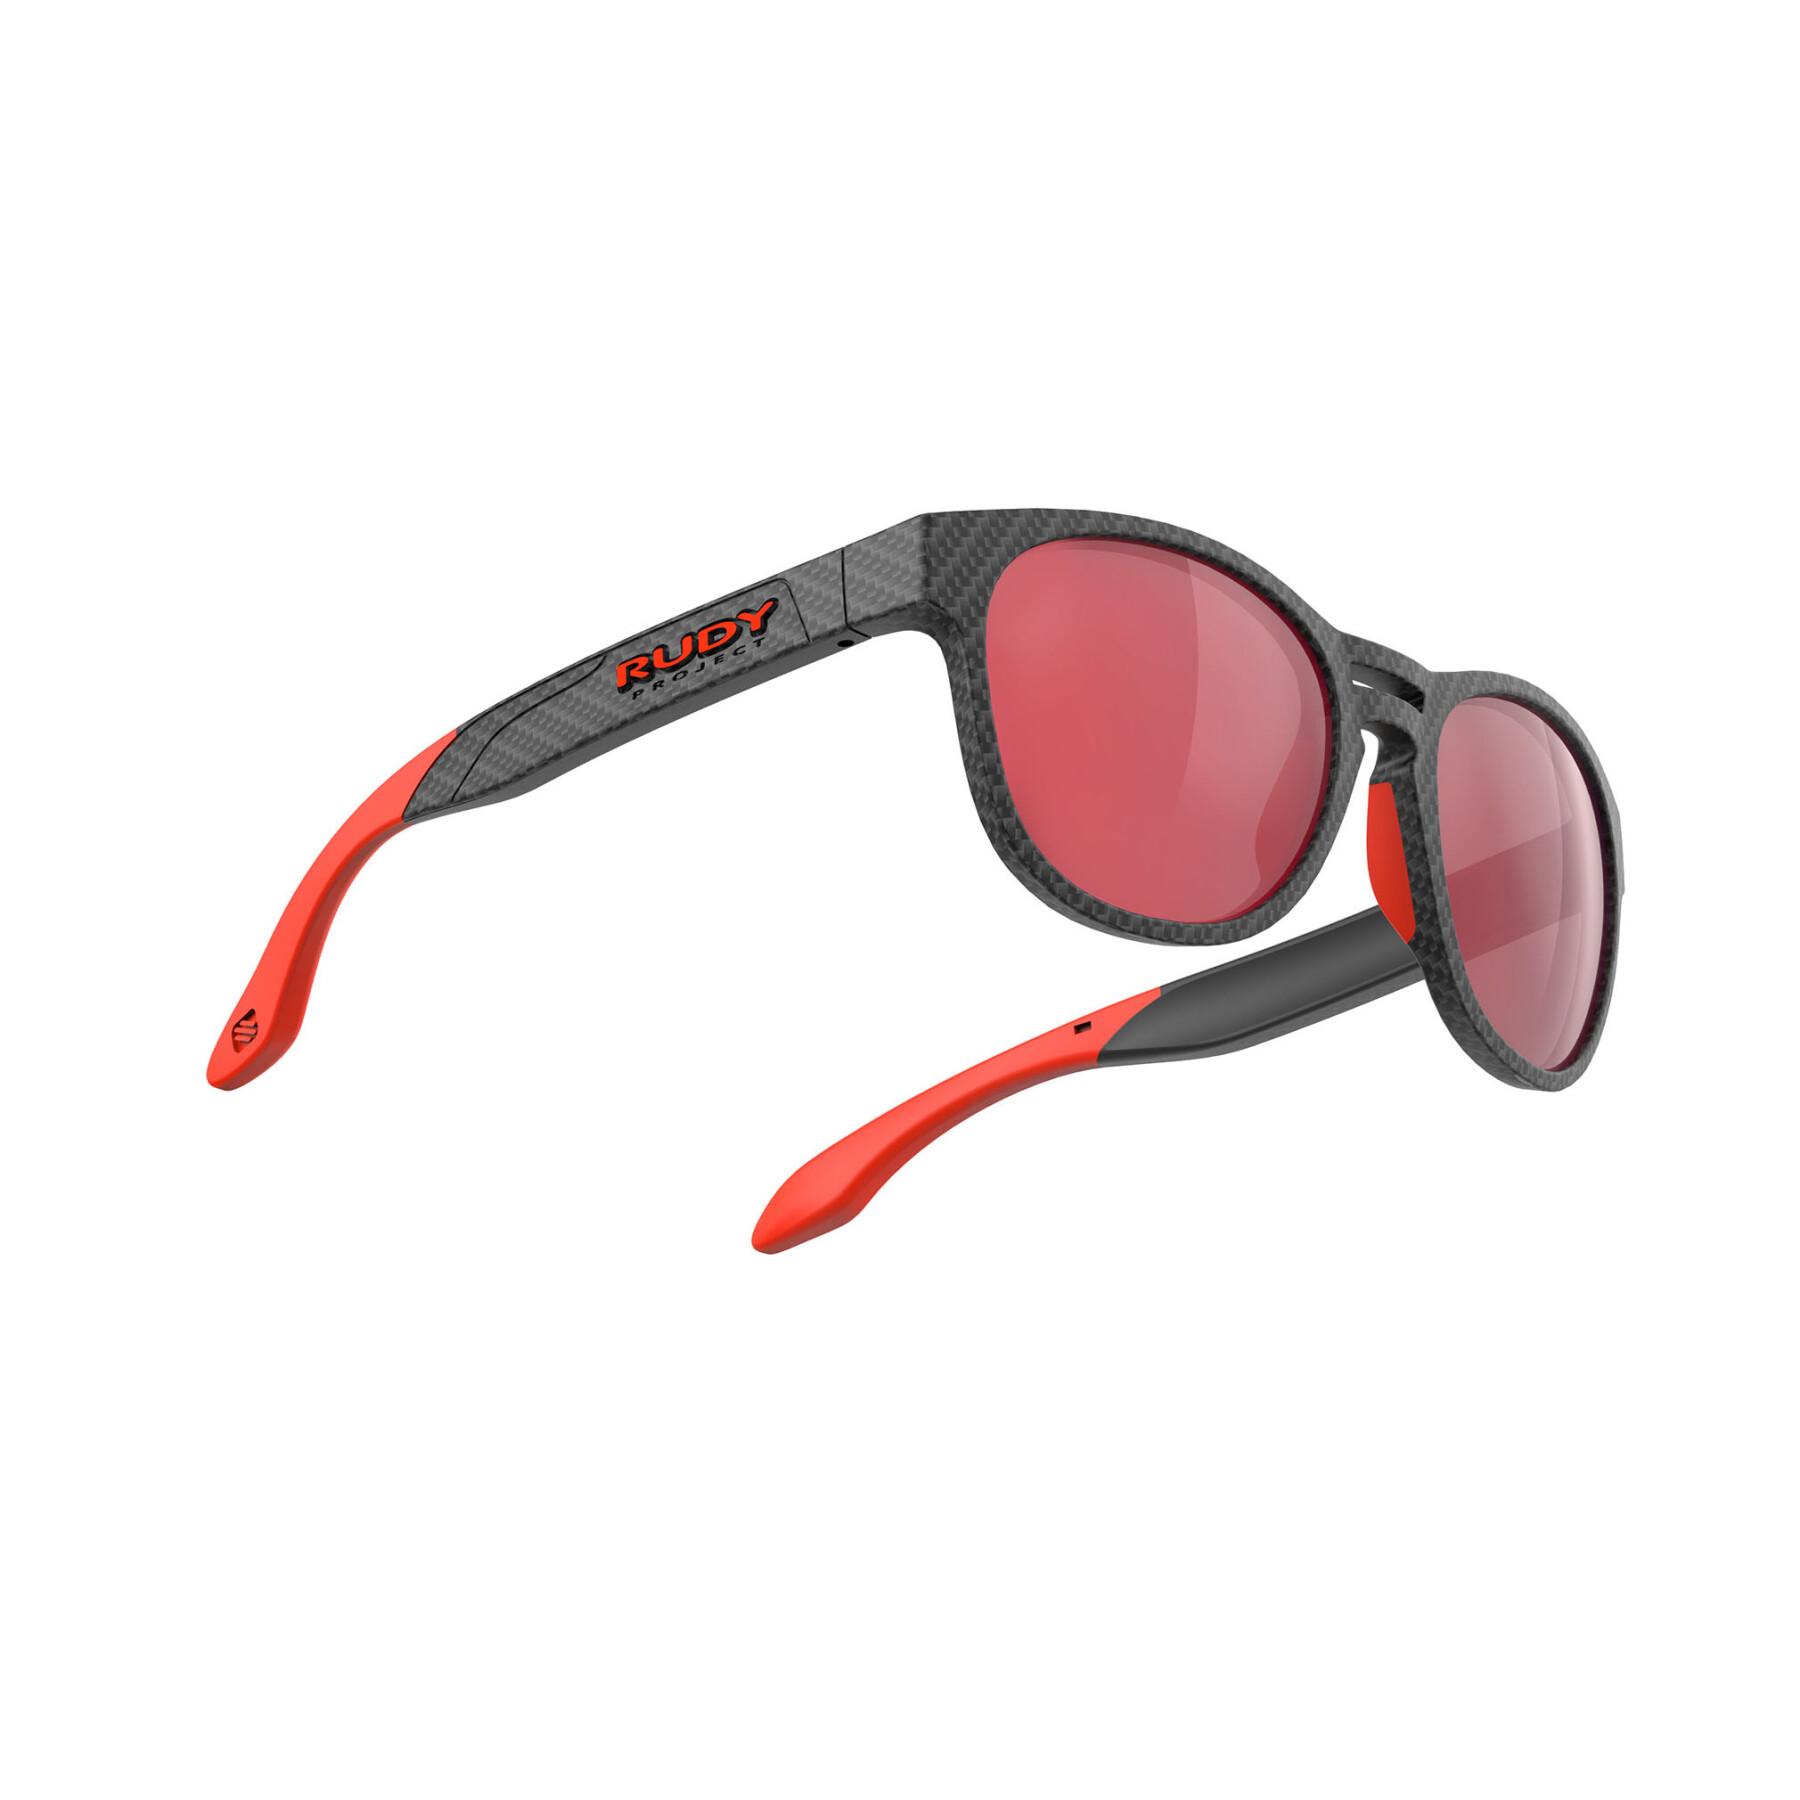 Sunglasses Rudy Project spinair 56 water sports